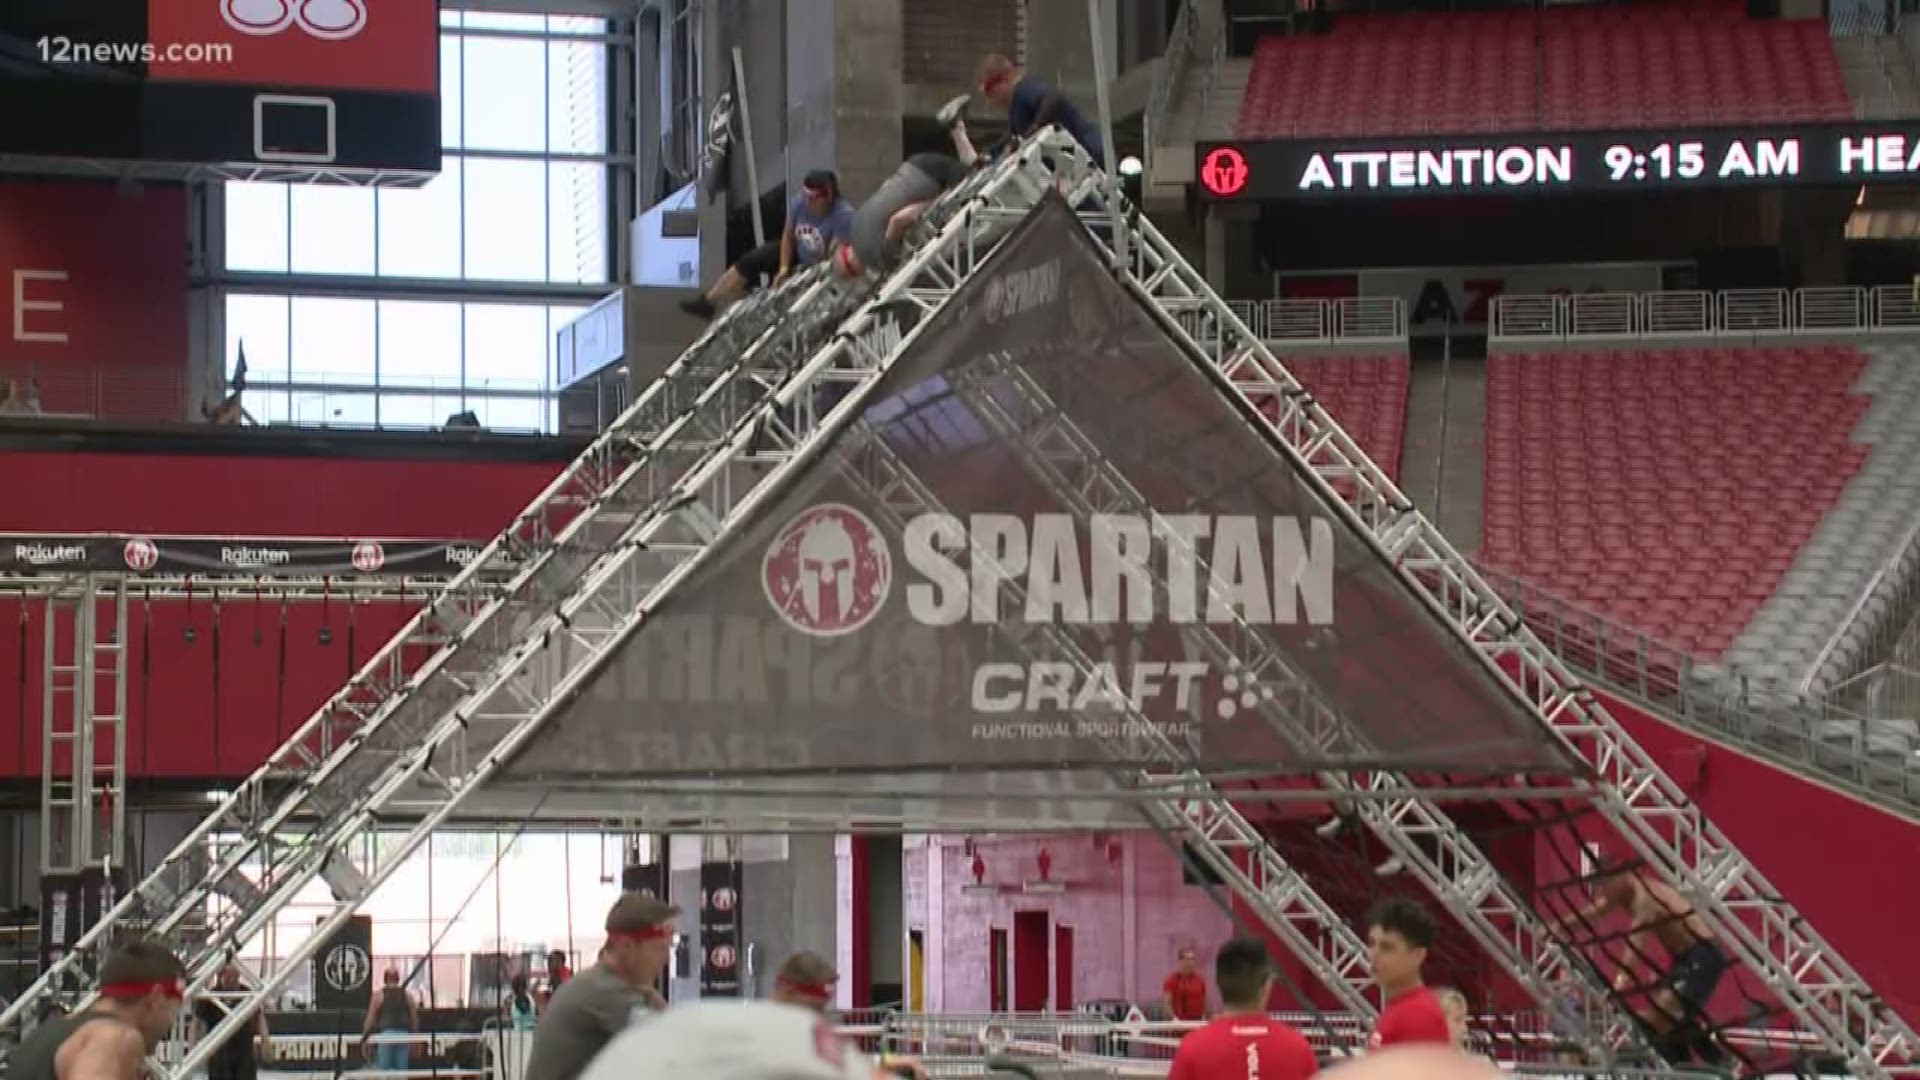 The world's largest obstacle race took over State Farm Stadium on Saturday.